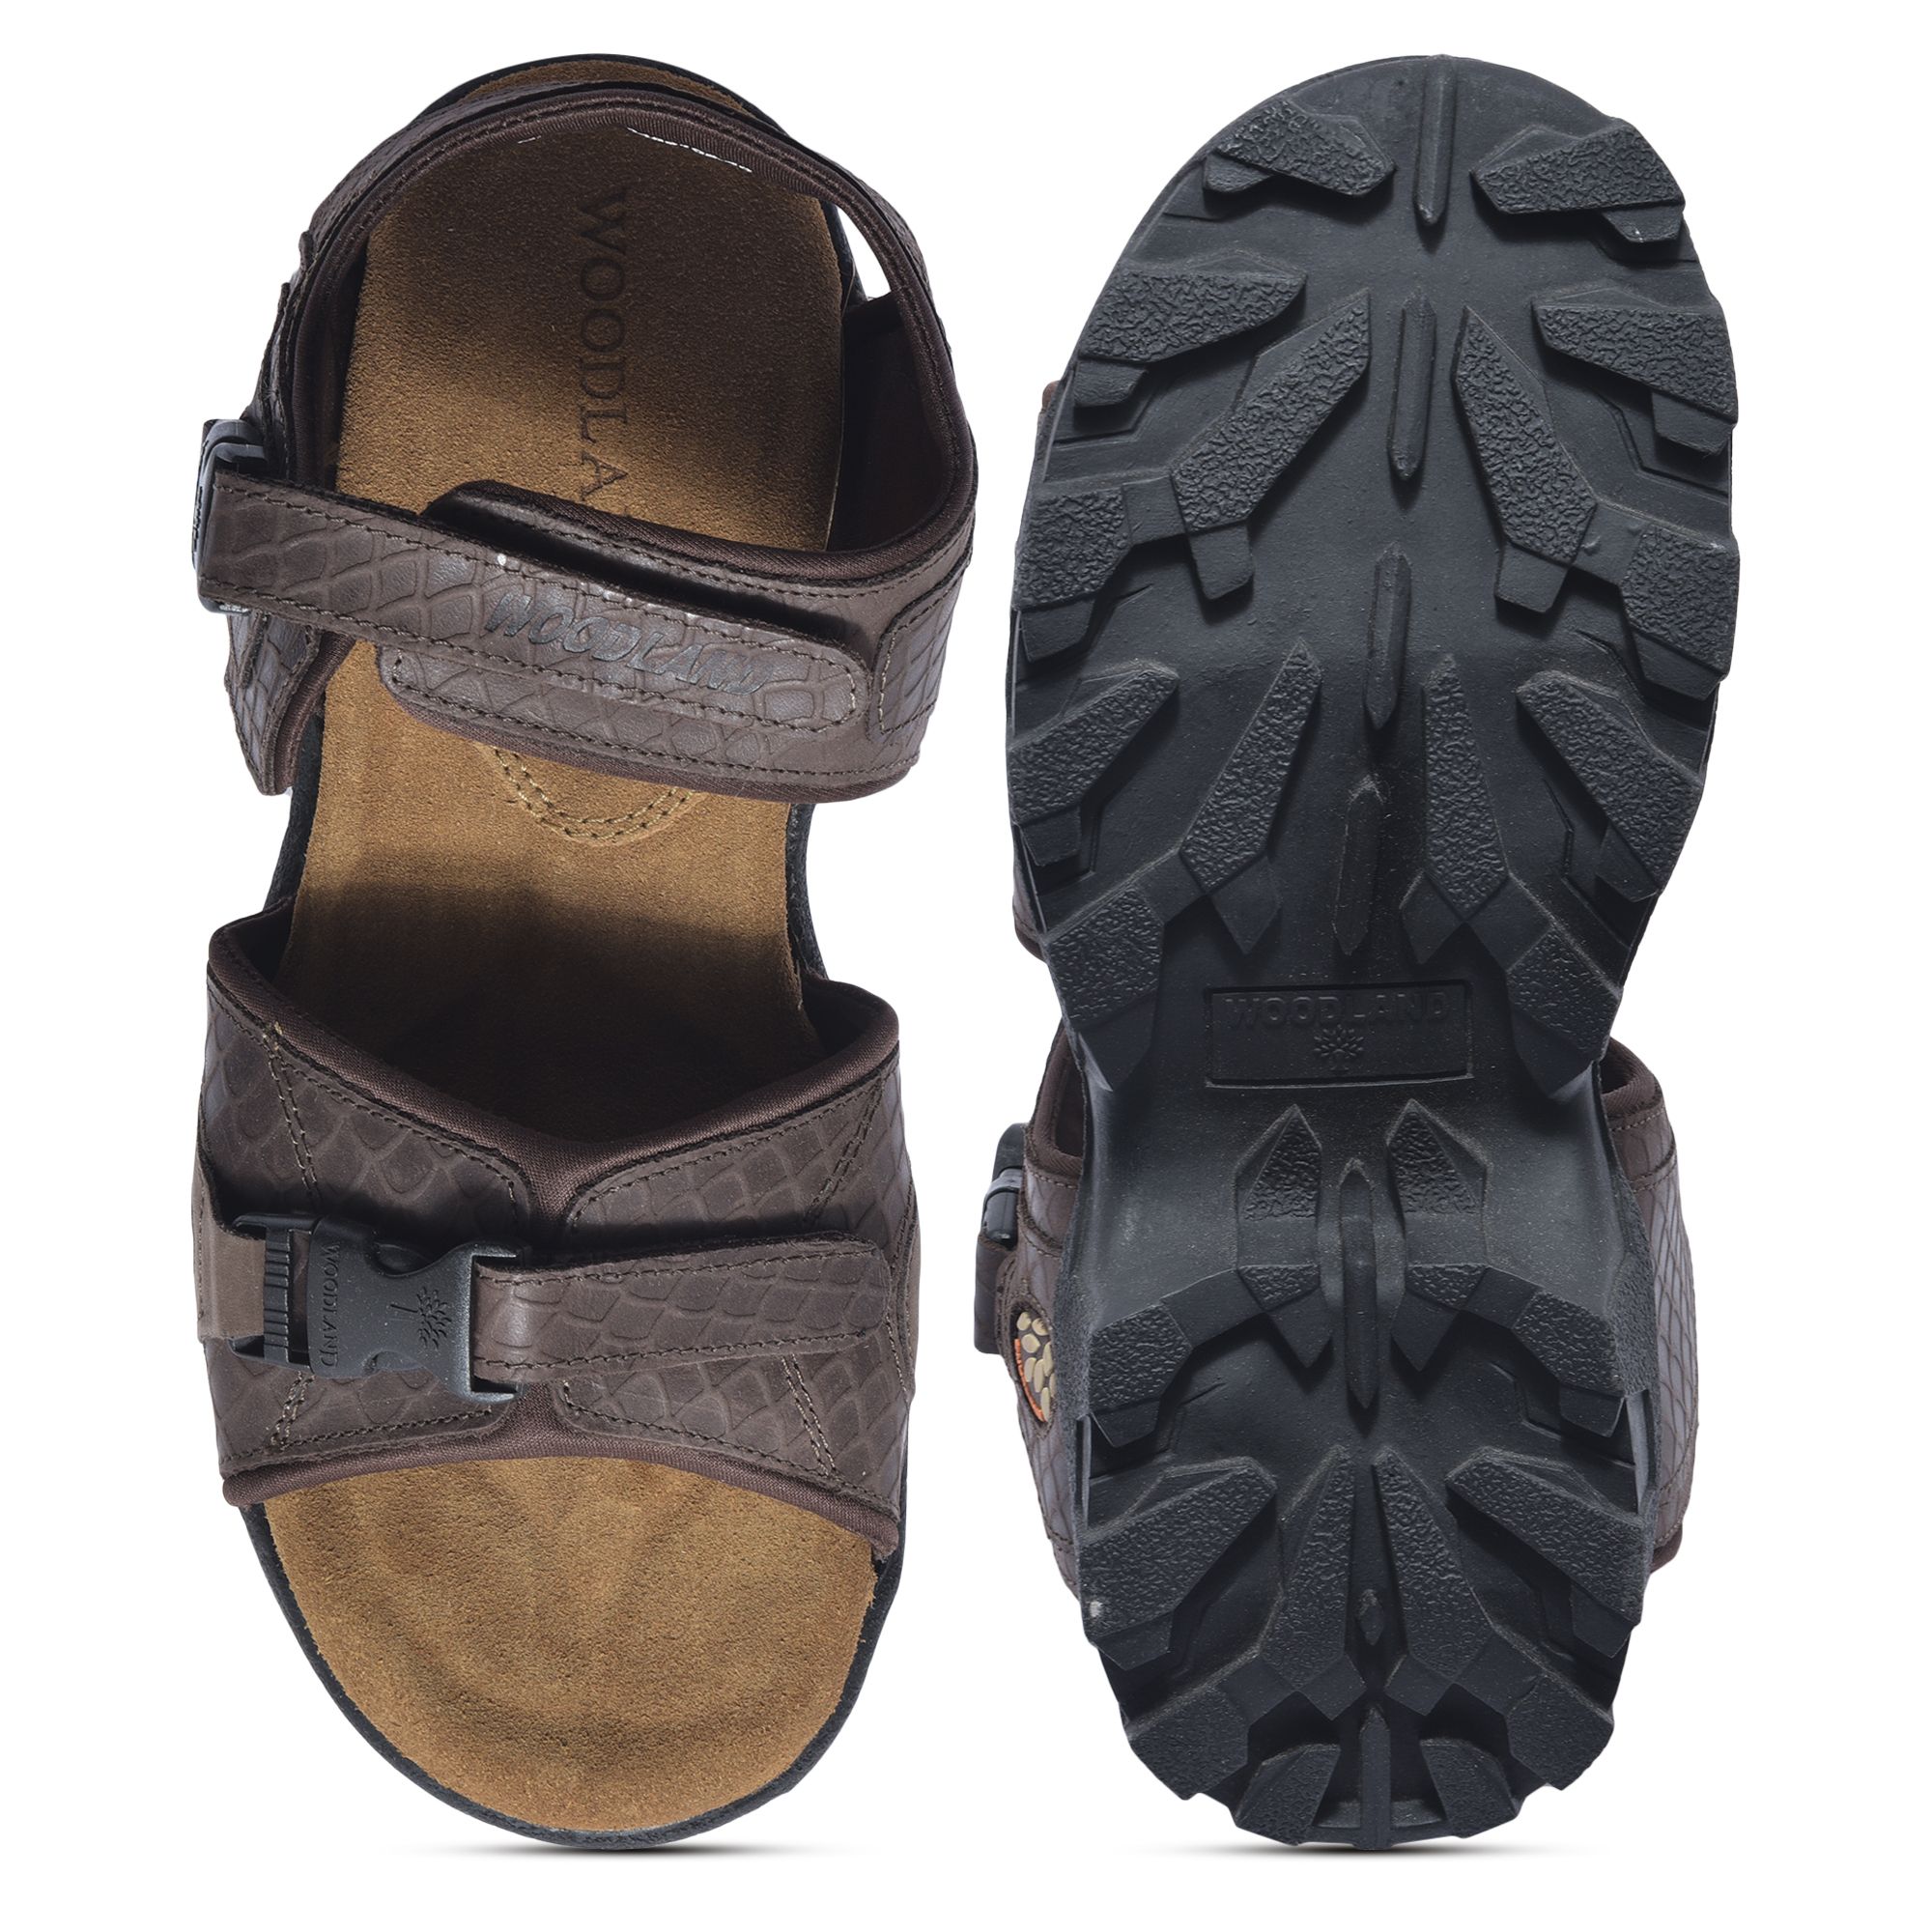 Buy Woodland Brown Toe Ring Sandals for Men at Best Price @ Tata CLiQ-sgquangbinhtourist.com.vn